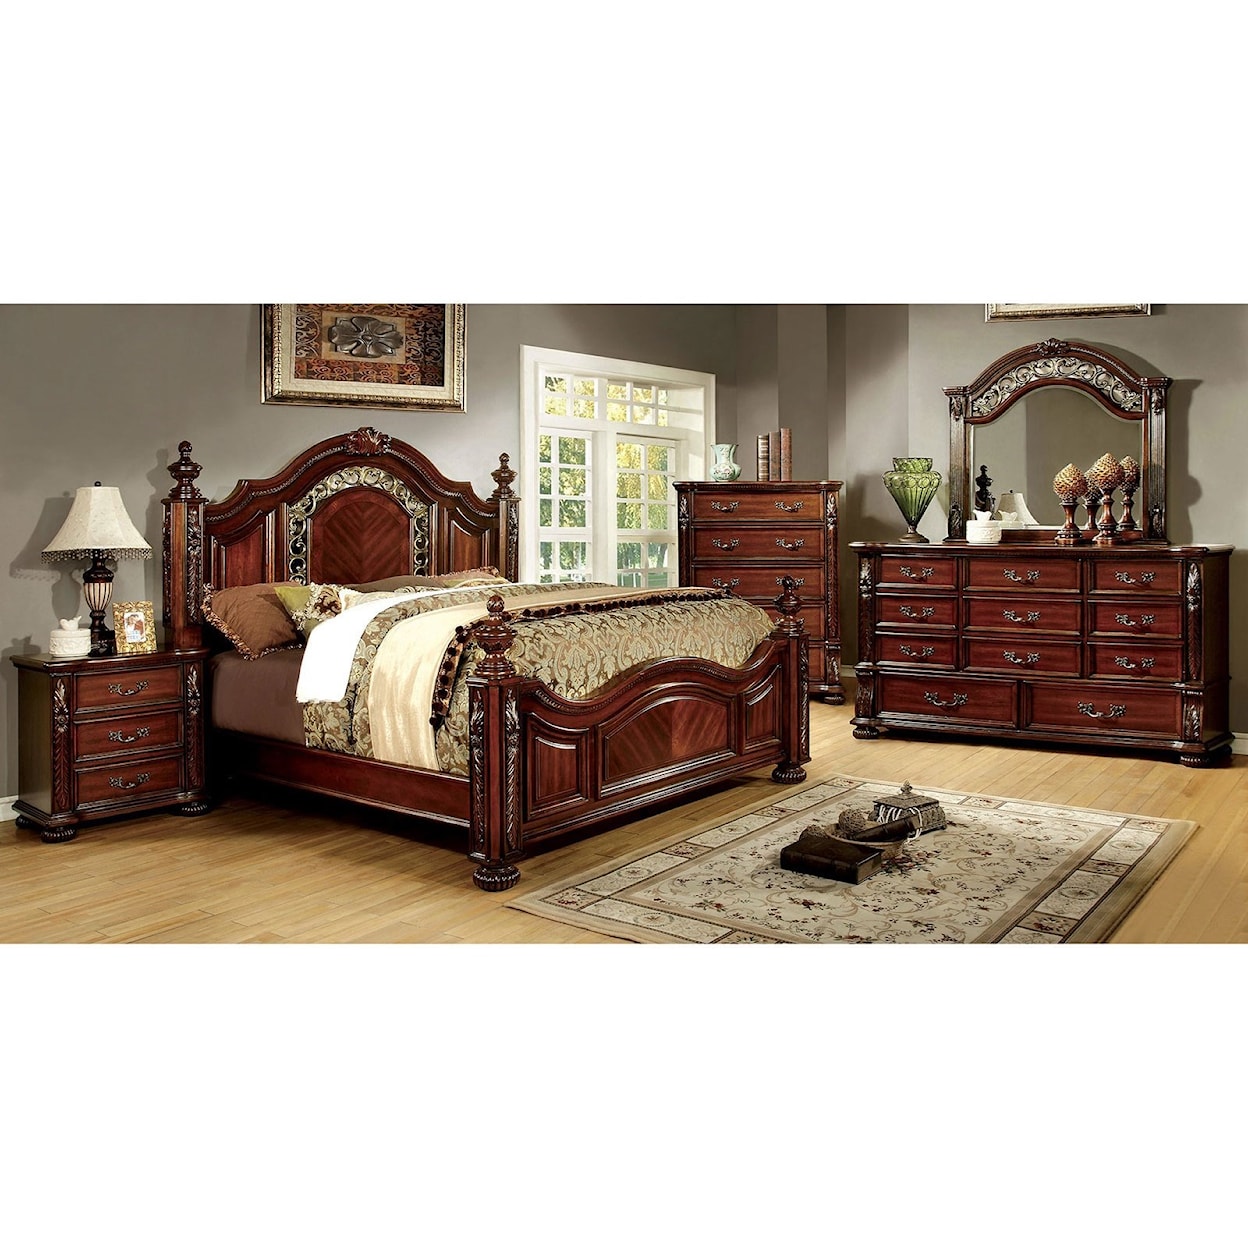 Furniture of America Arthur Chest of Drawers